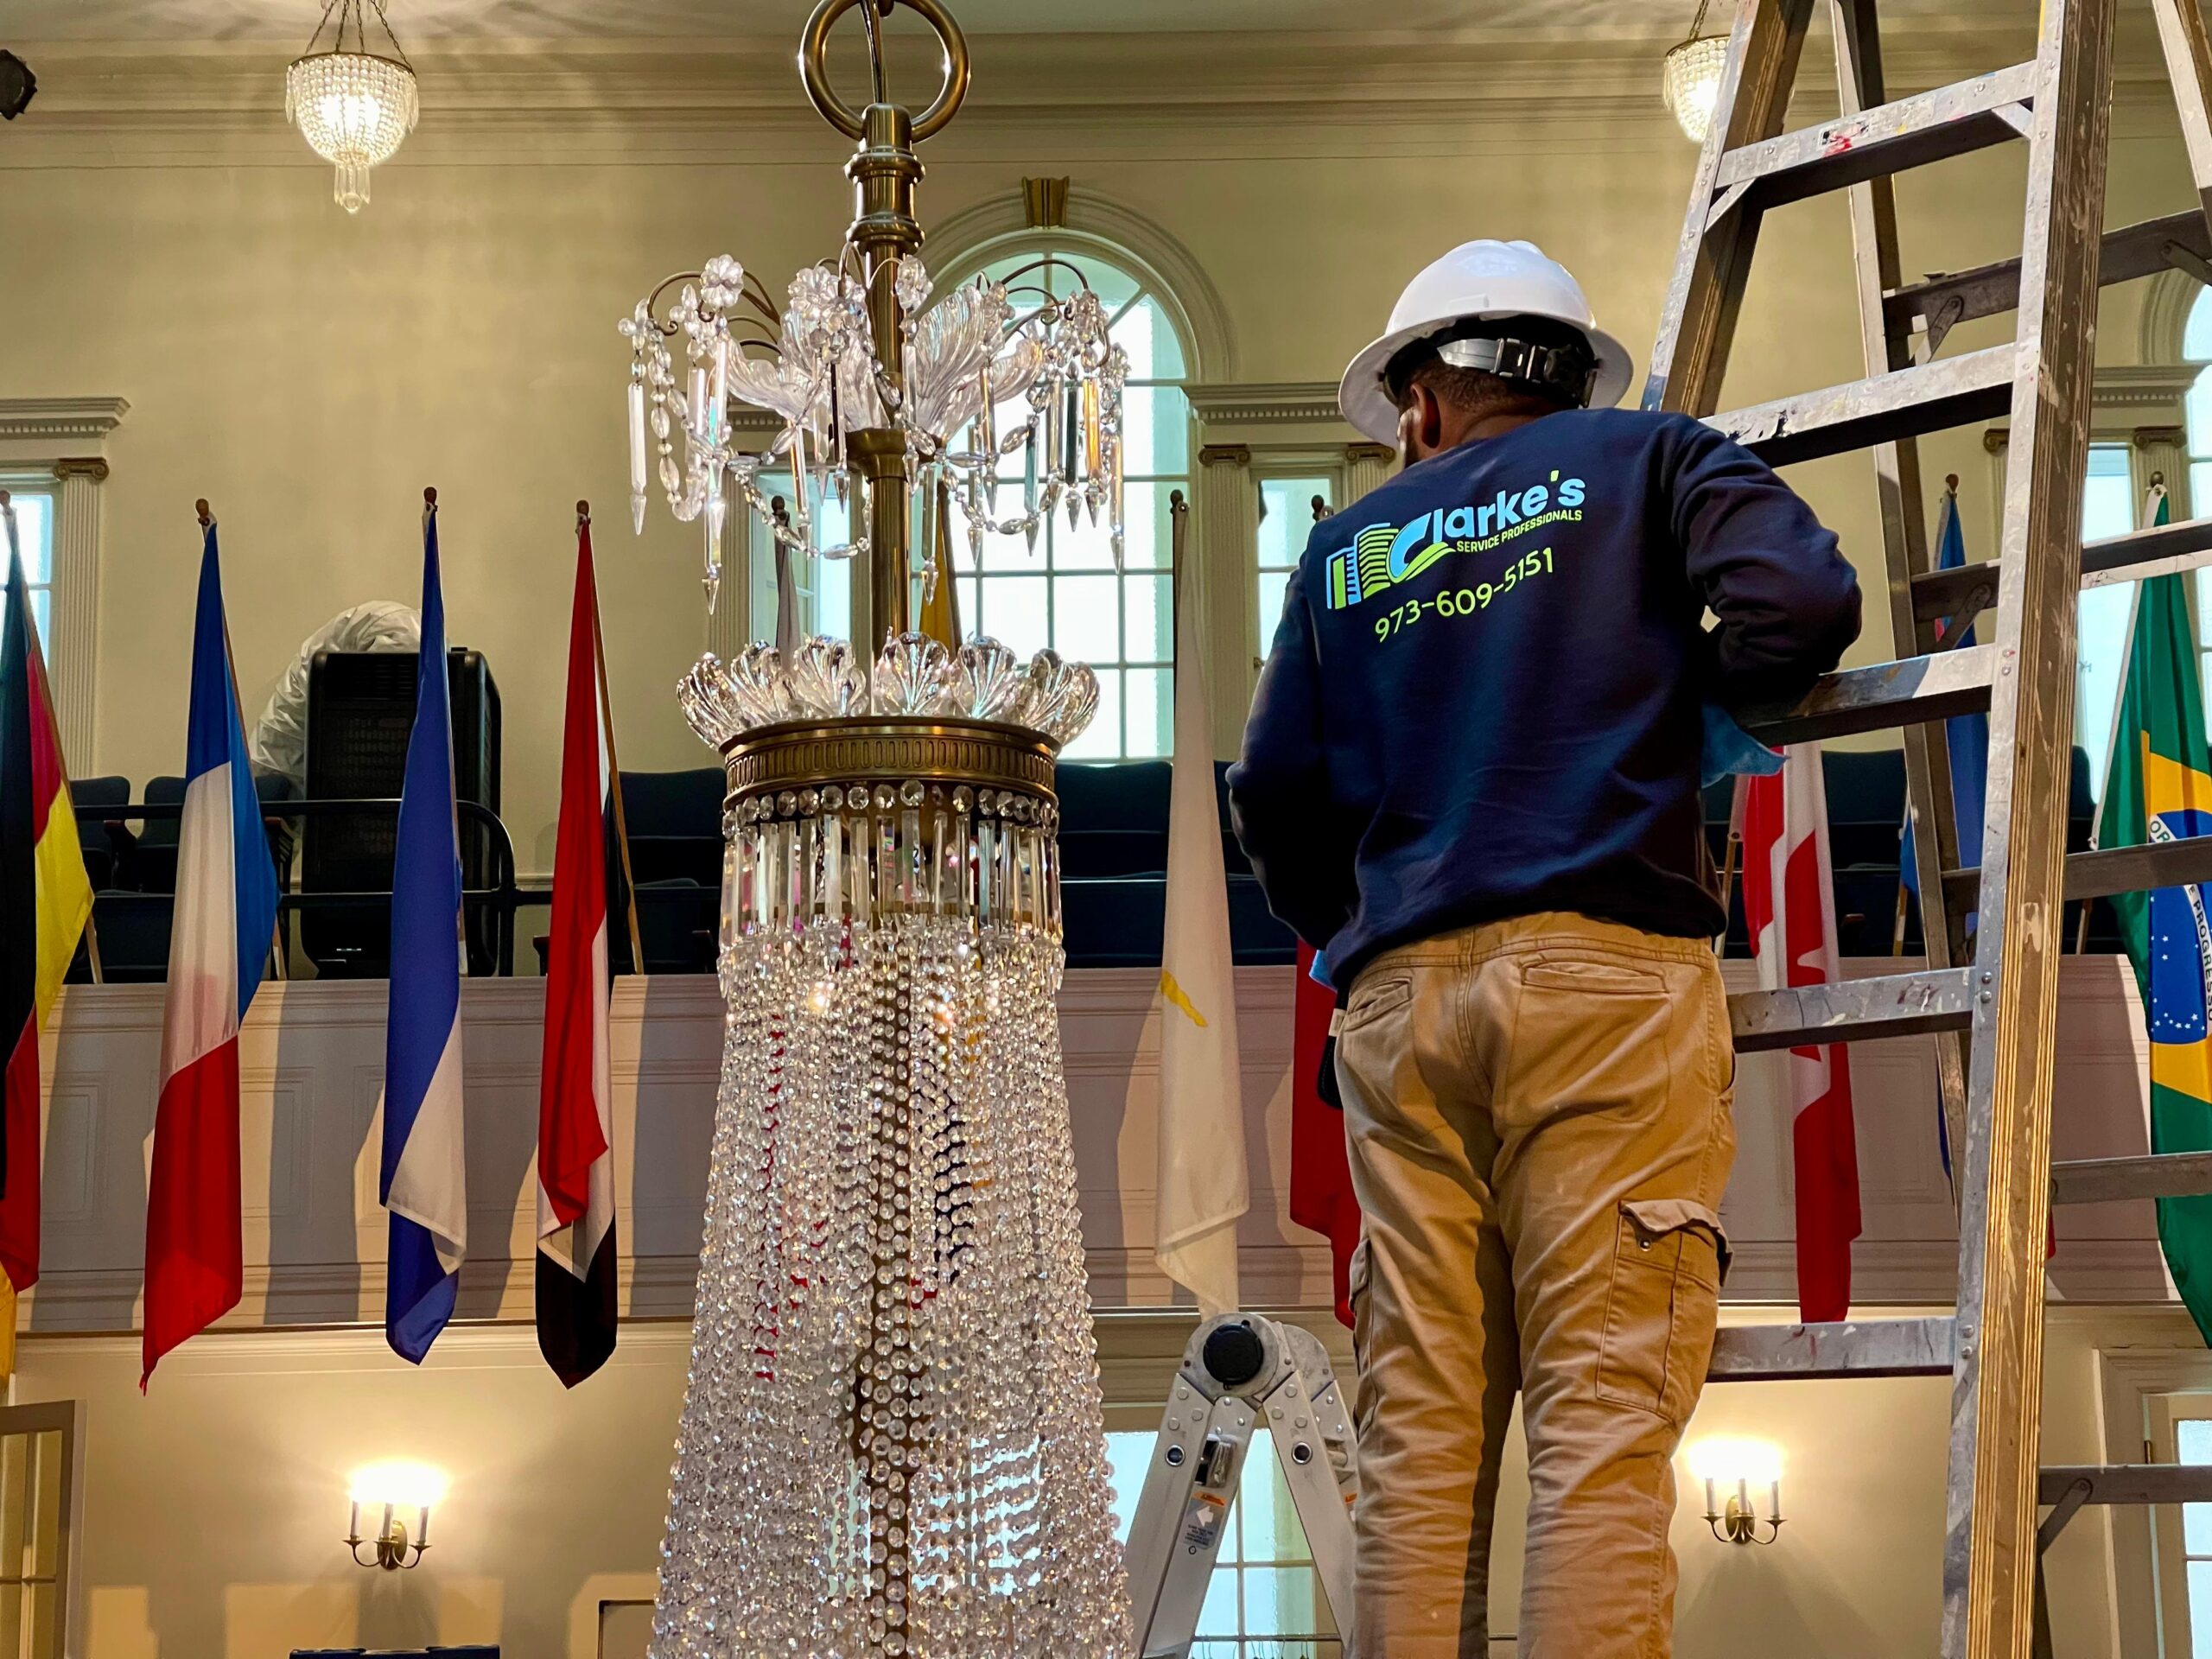 Clarke's Service Professional stands on a ladder next to a chandelier to clean it.